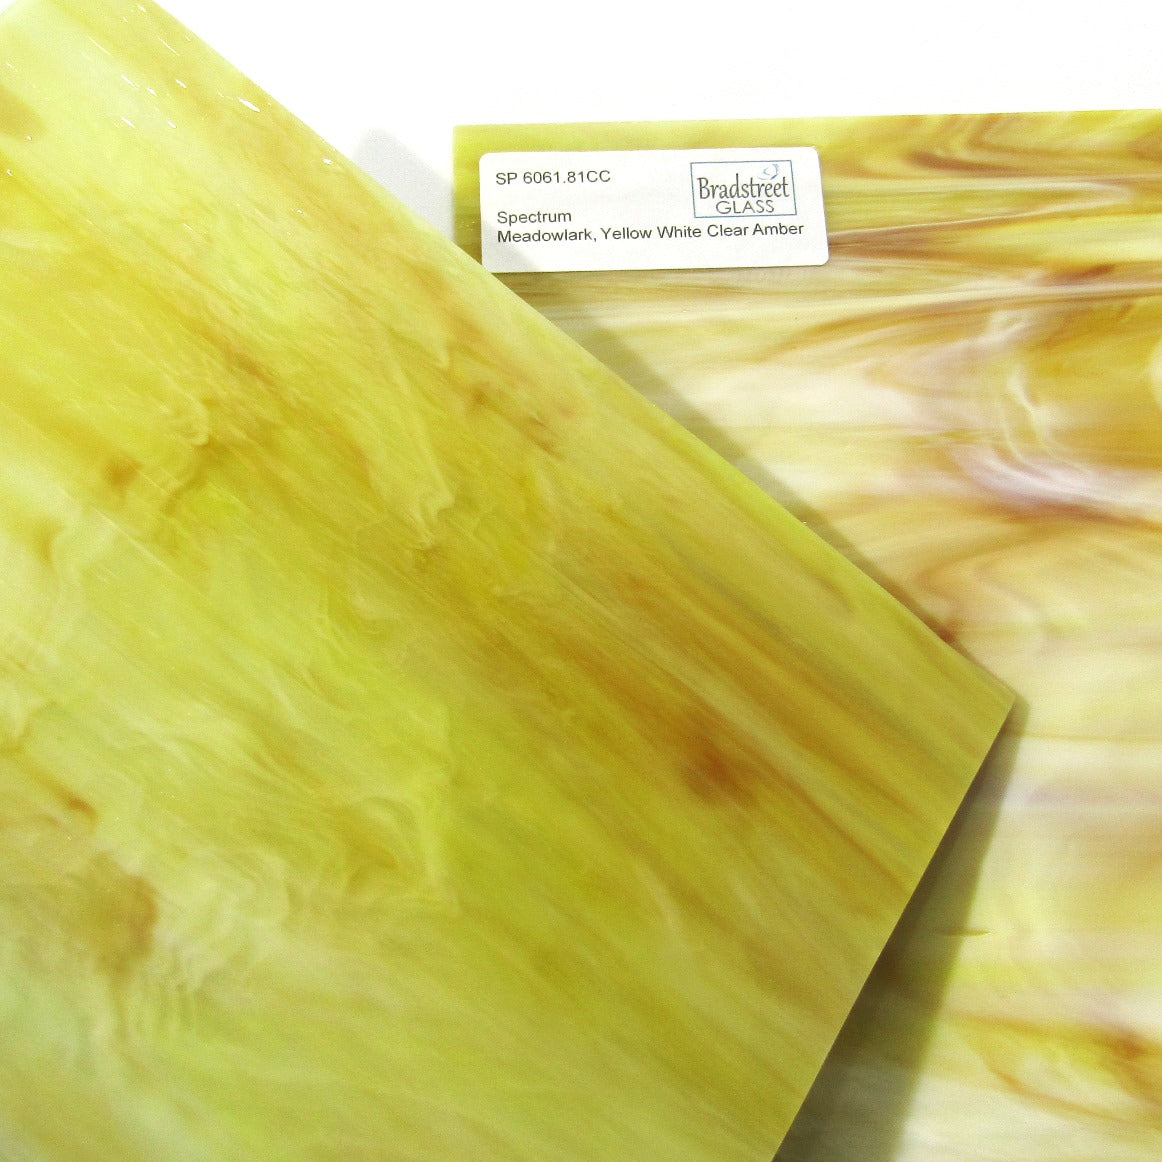 Meadowlark Pearl Opal Fusible Stained Glass Sheet Yellow, White, Clear, Amber 96 COE Oceanside SF6061.81CC